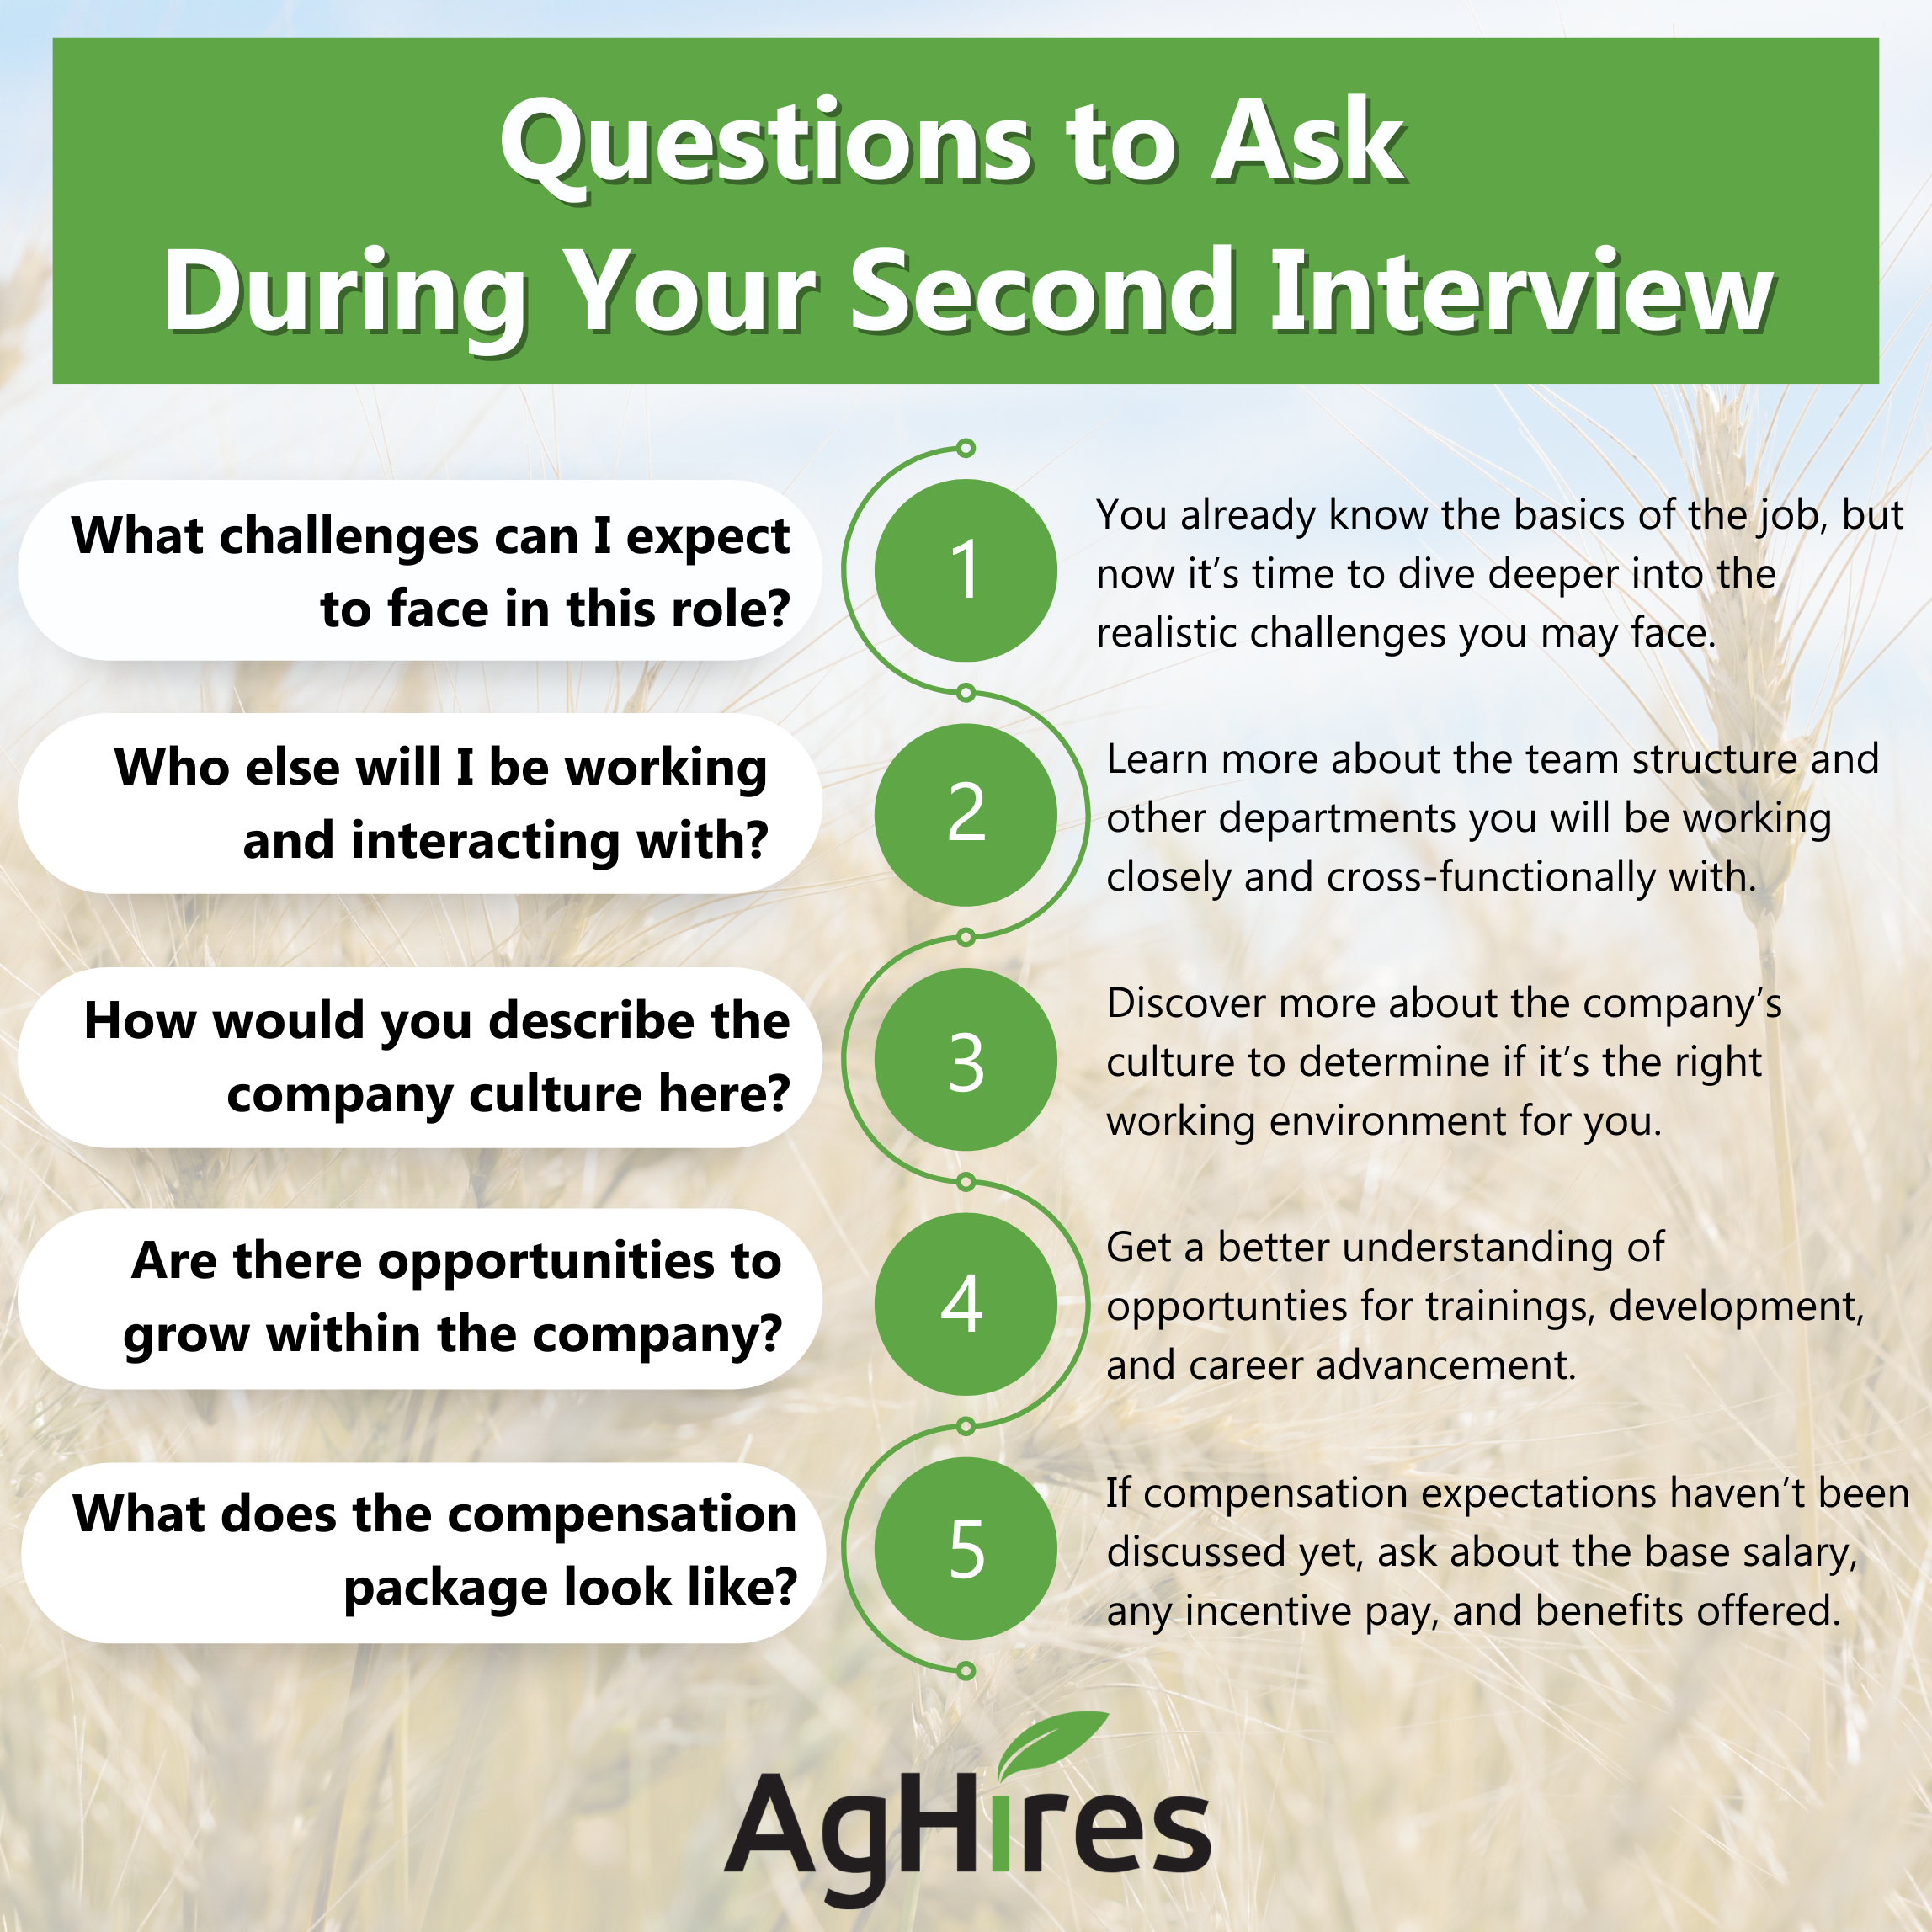 Questions to ask during second interview (1)